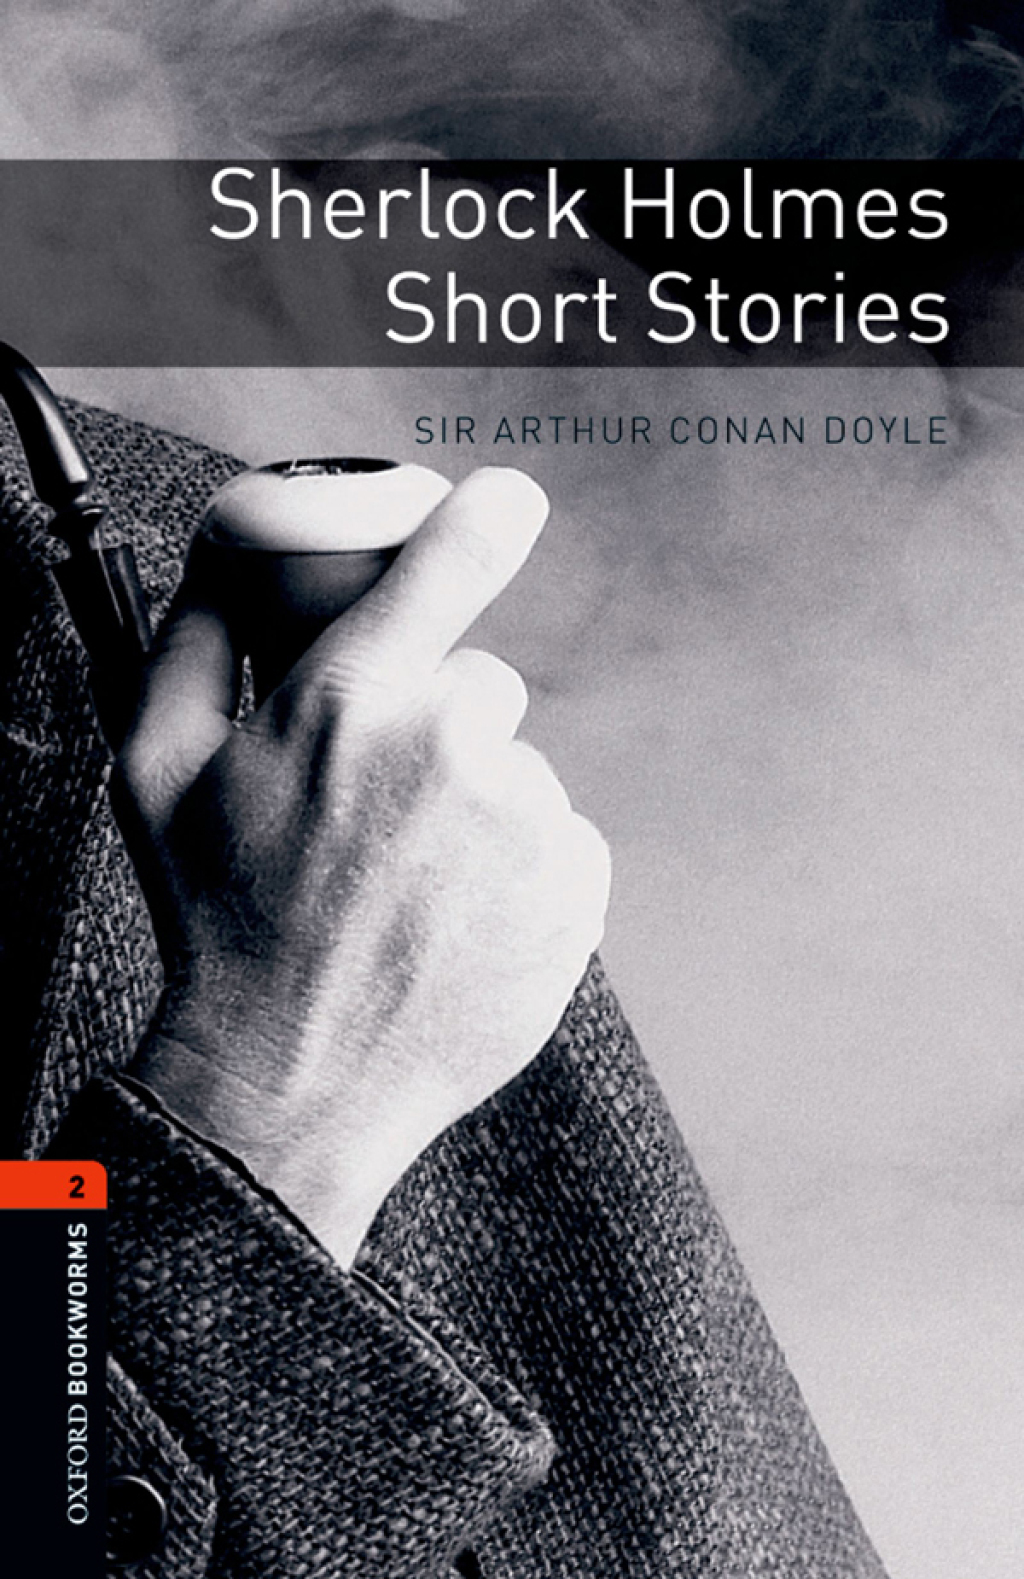 Sherlock Holmes Short Stories Level 2 Oxford Bookworms Library - 3rd Edition (eBook Rental)